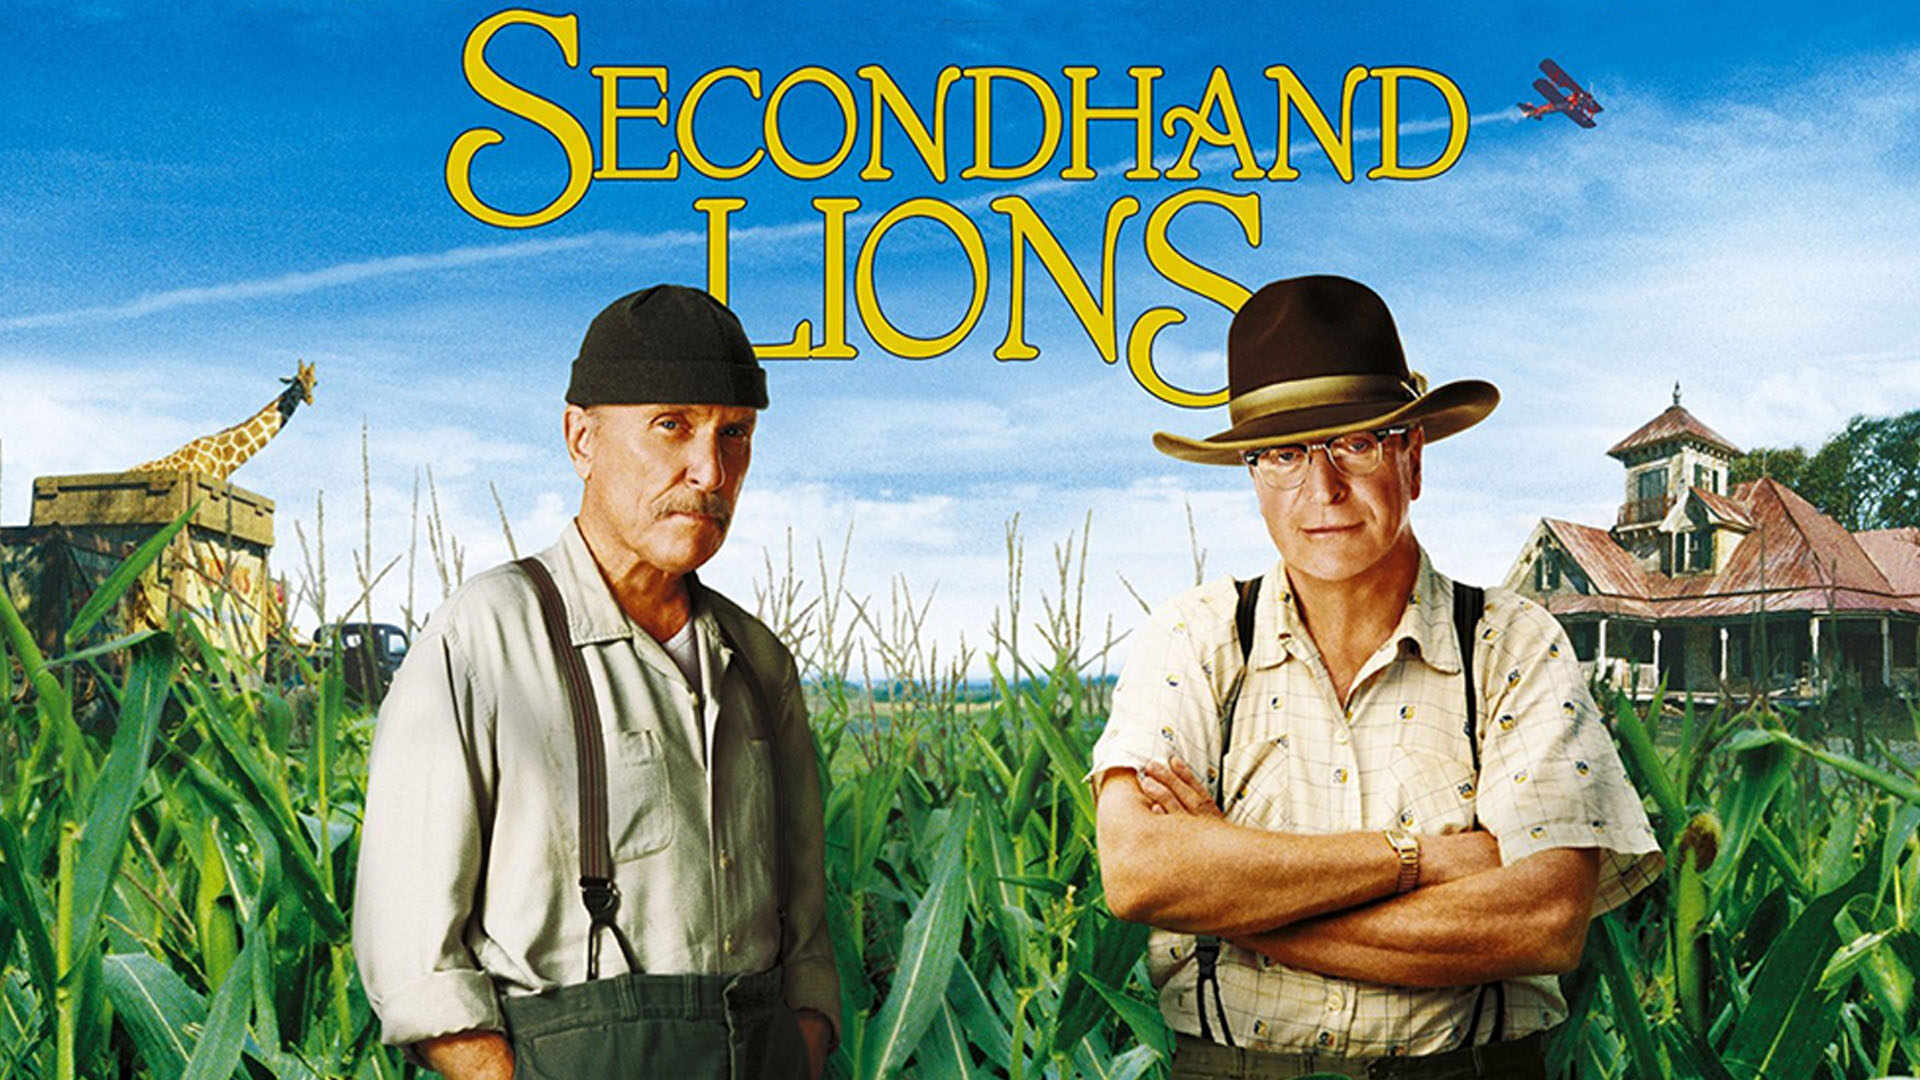 Secondhand Lions (Blu-ray)